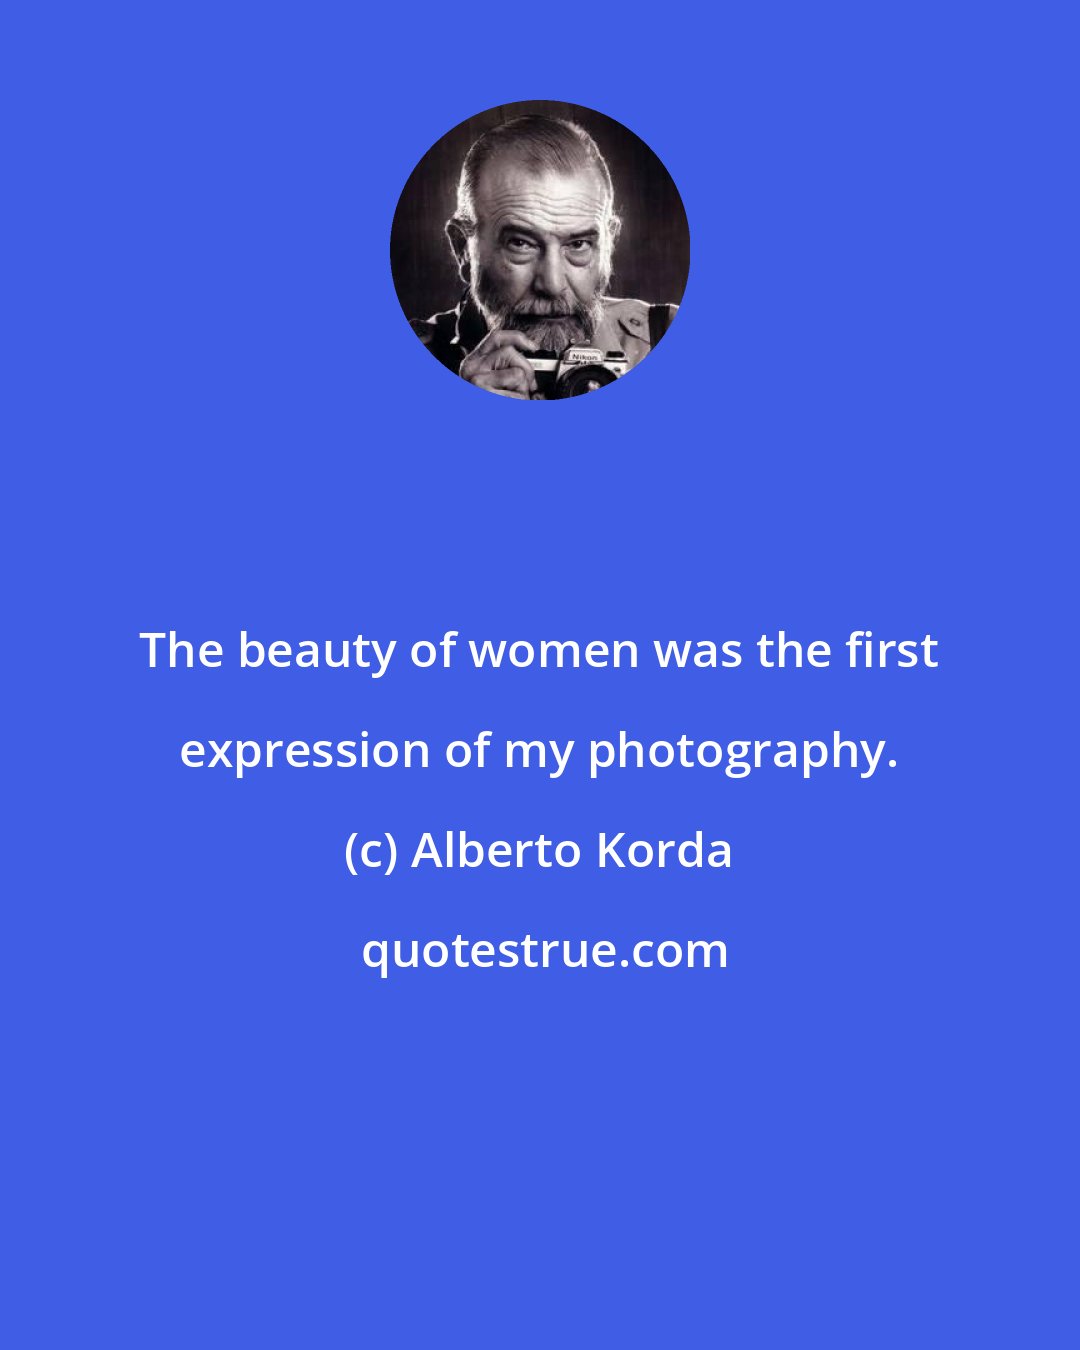 Alberto Korda: The beauty of women was the first expression of my photography.